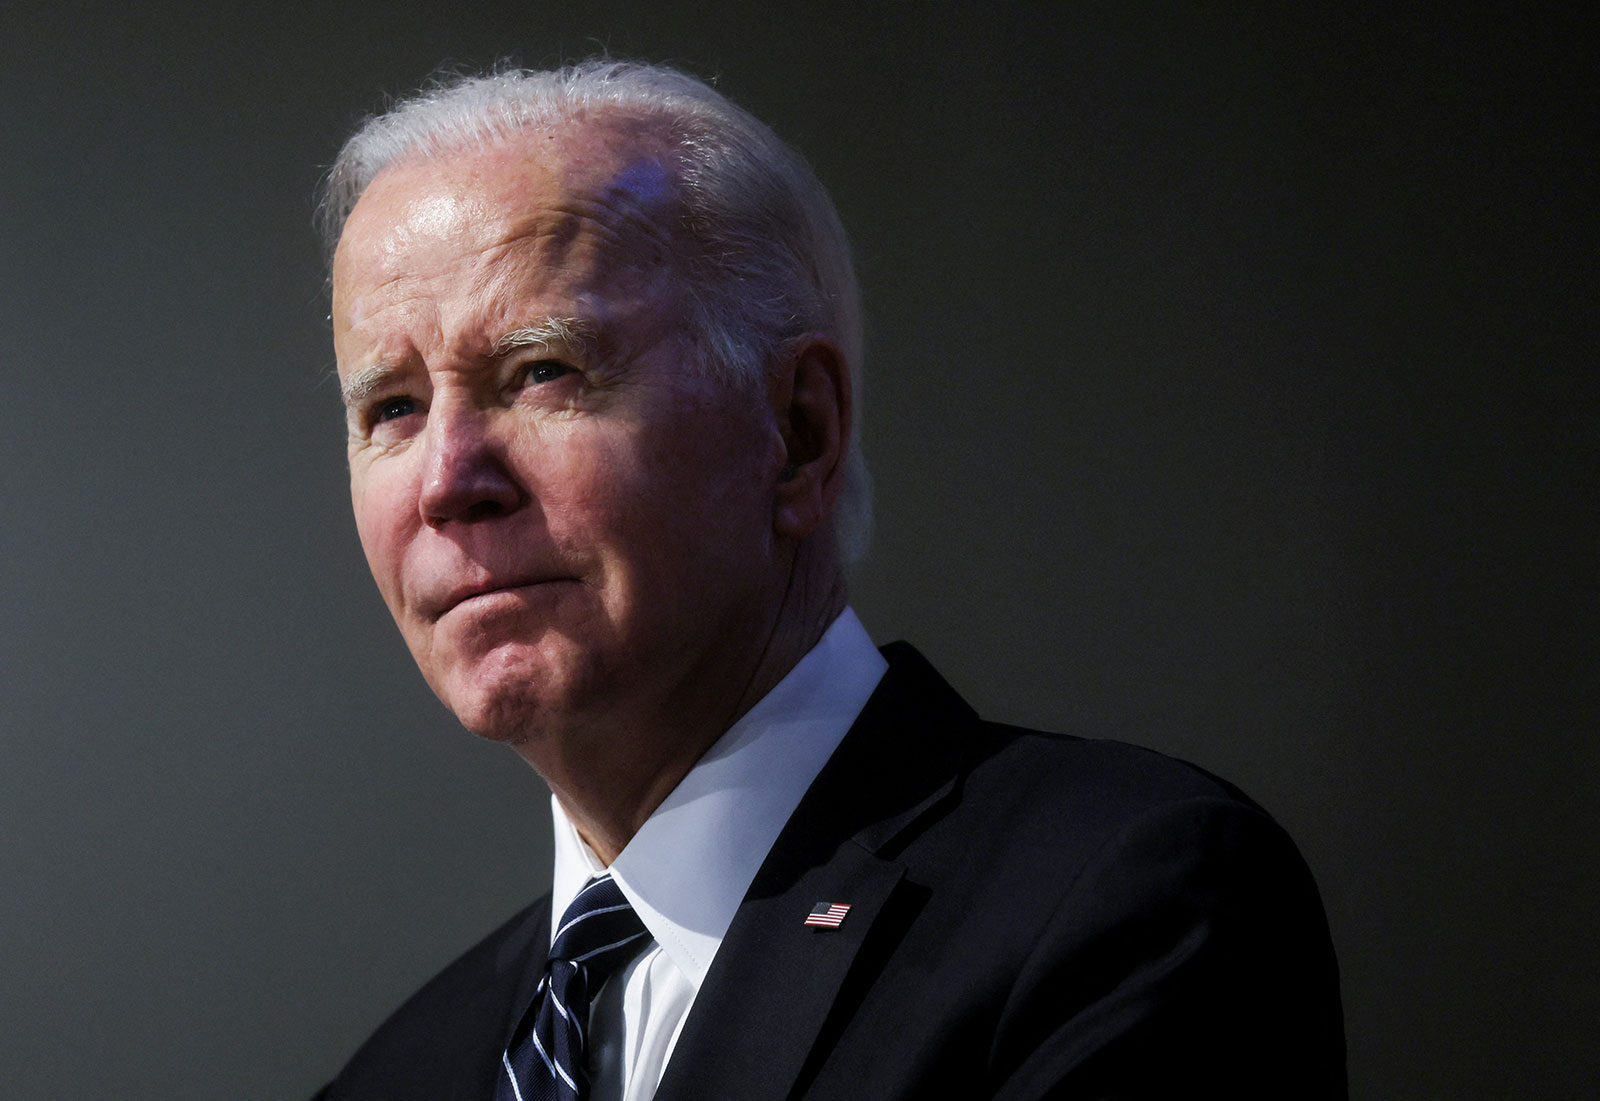 Biden will address Silicon Valley Bank collapse at 8 a.m. ET